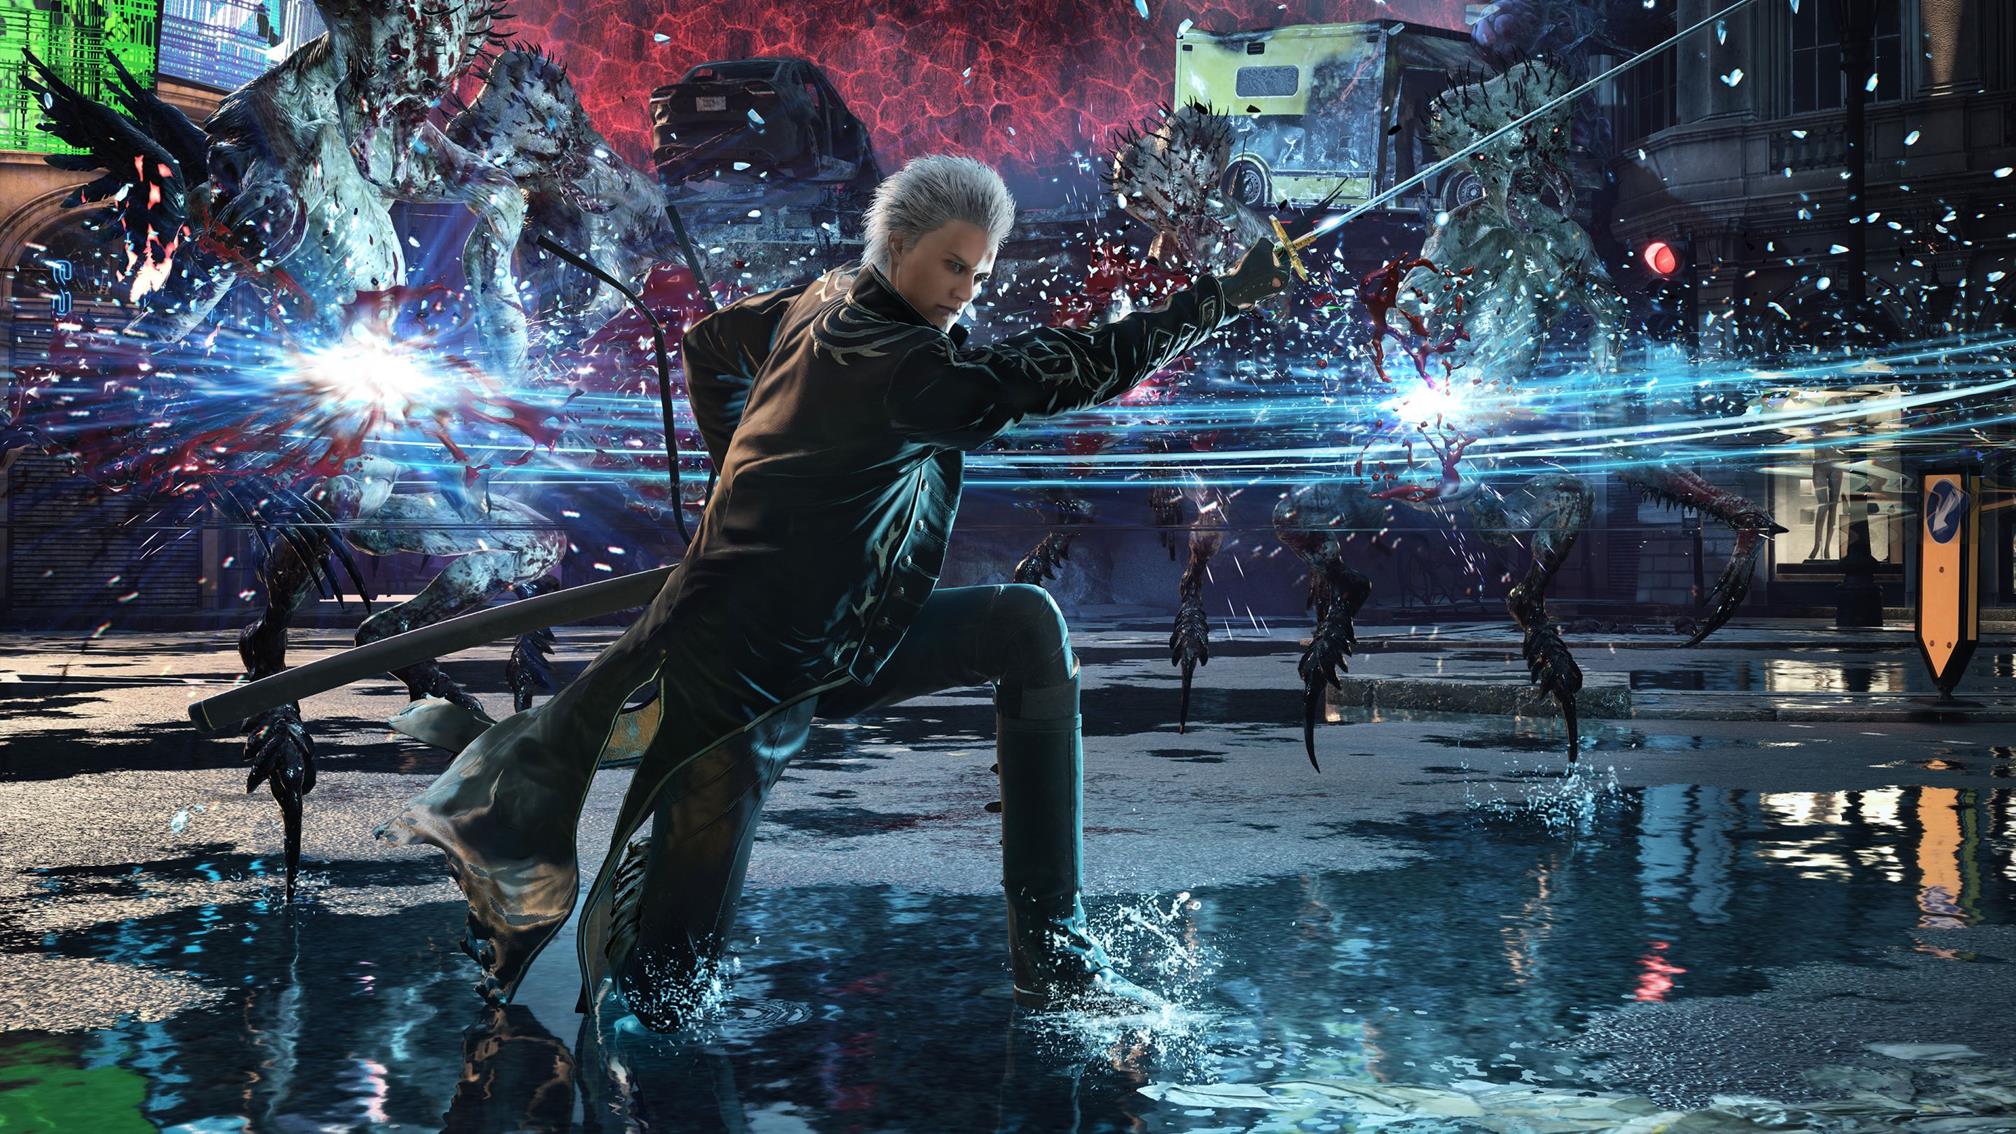 Do Not Track for Devil May Cry 5 Special Edition on Xbox Series S.